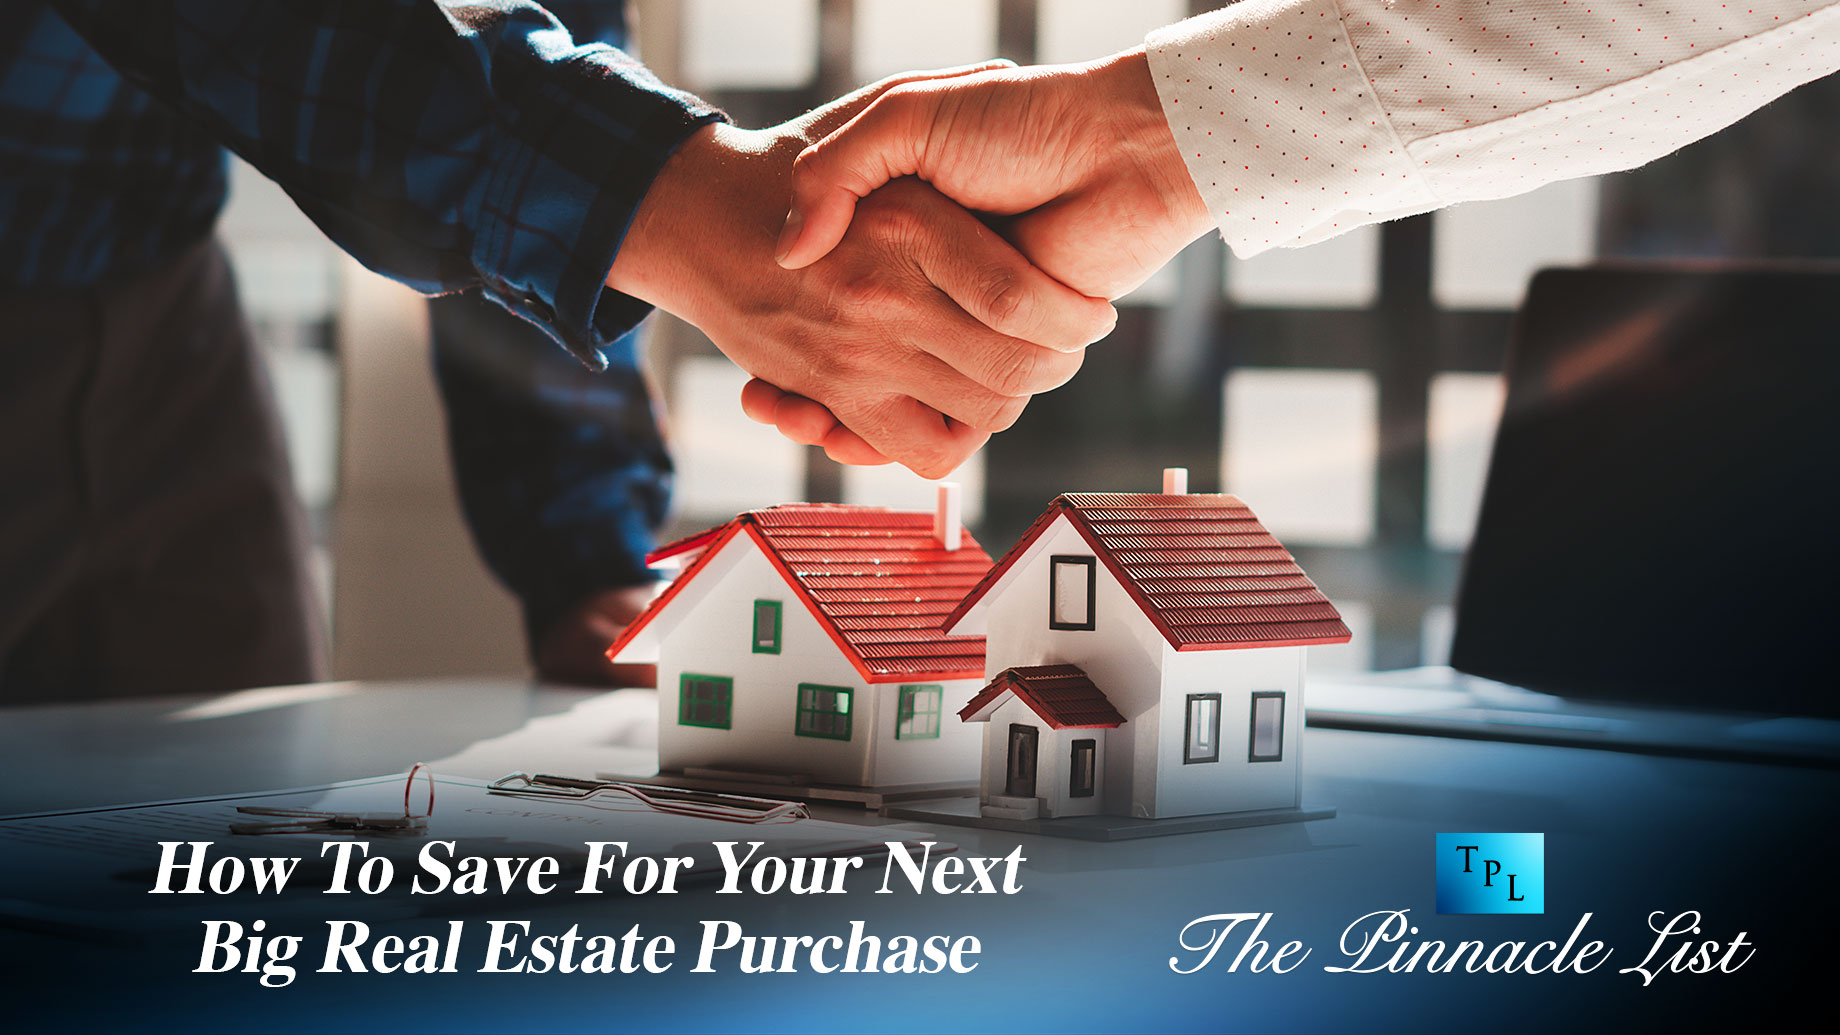 How To Save For Your Next Big Real Estate Purchase